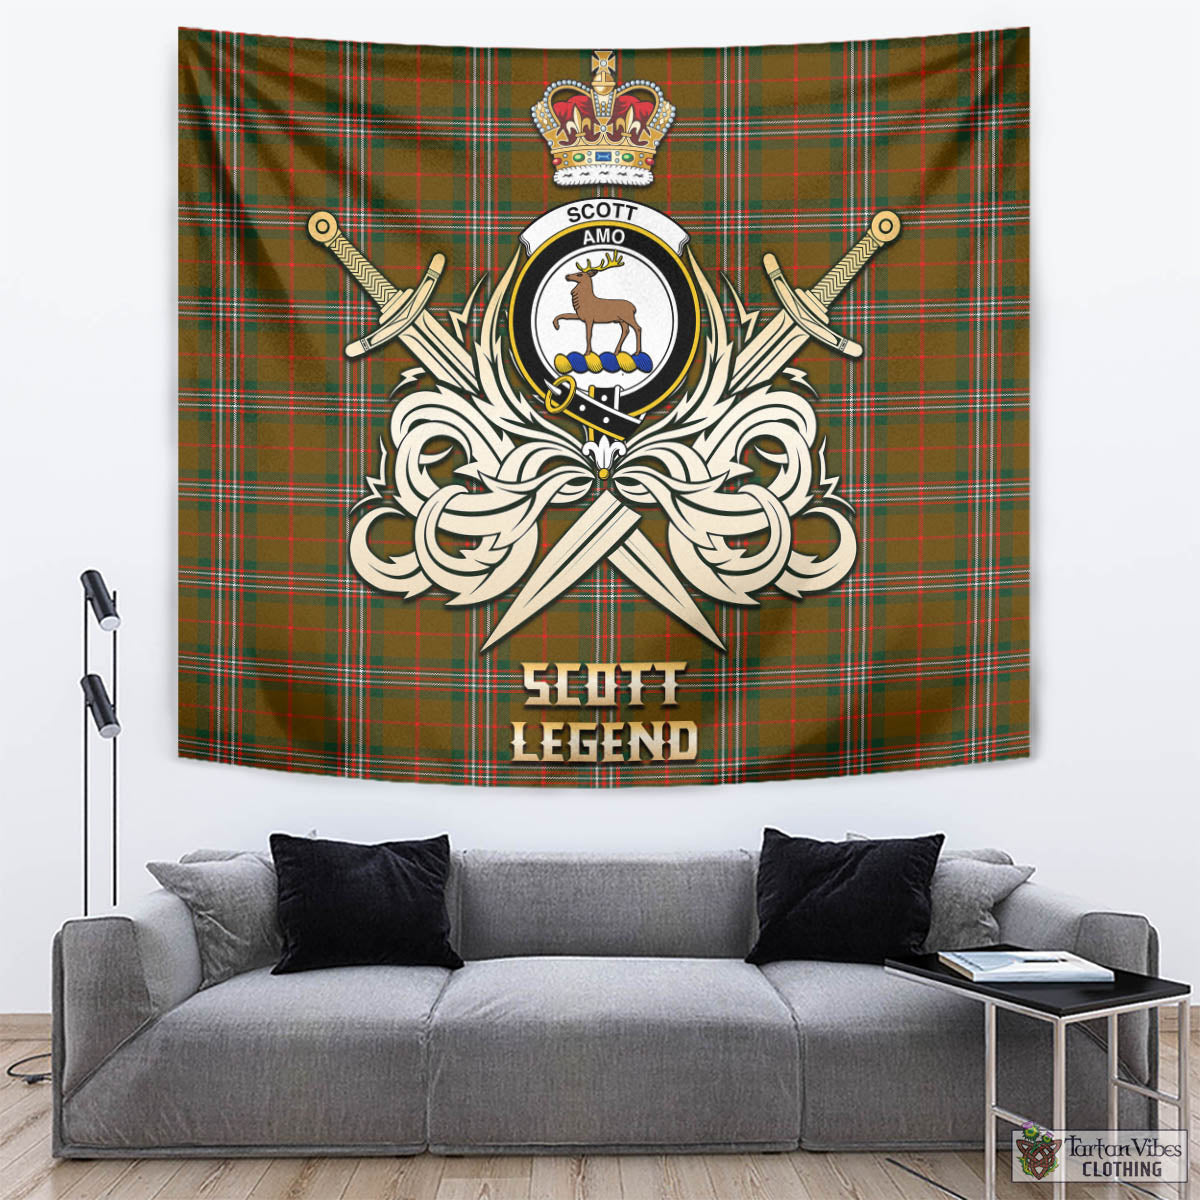 Tartan Vibes Clothing Scott Brown Modern Tartan Tapestry with Clan Crest and the Golden Sword of Courageous Legacy